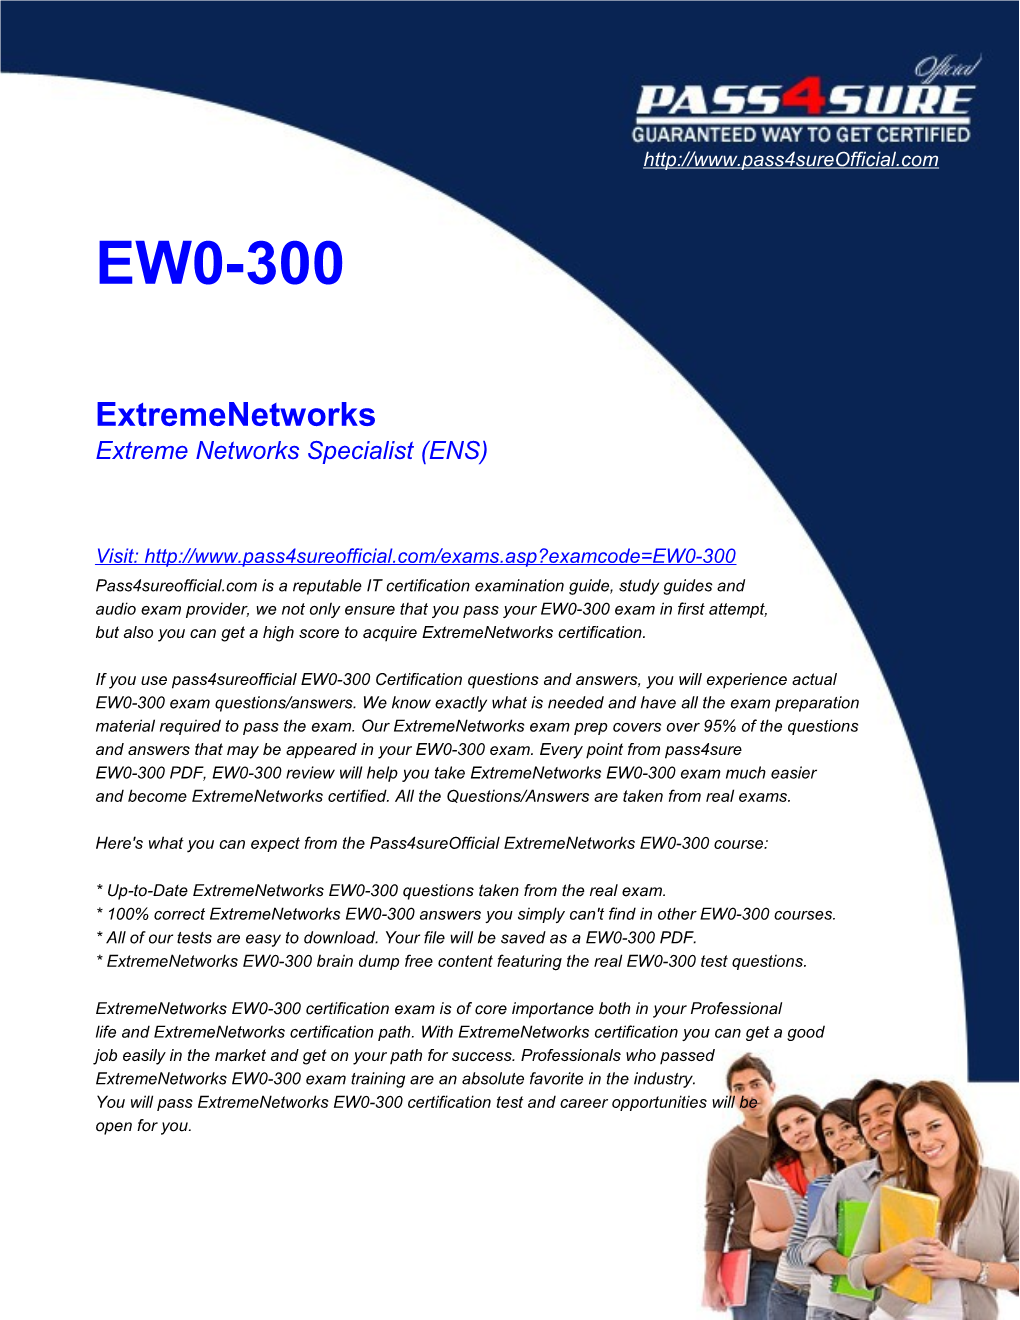 Extreme Networks Specialist (ENS)